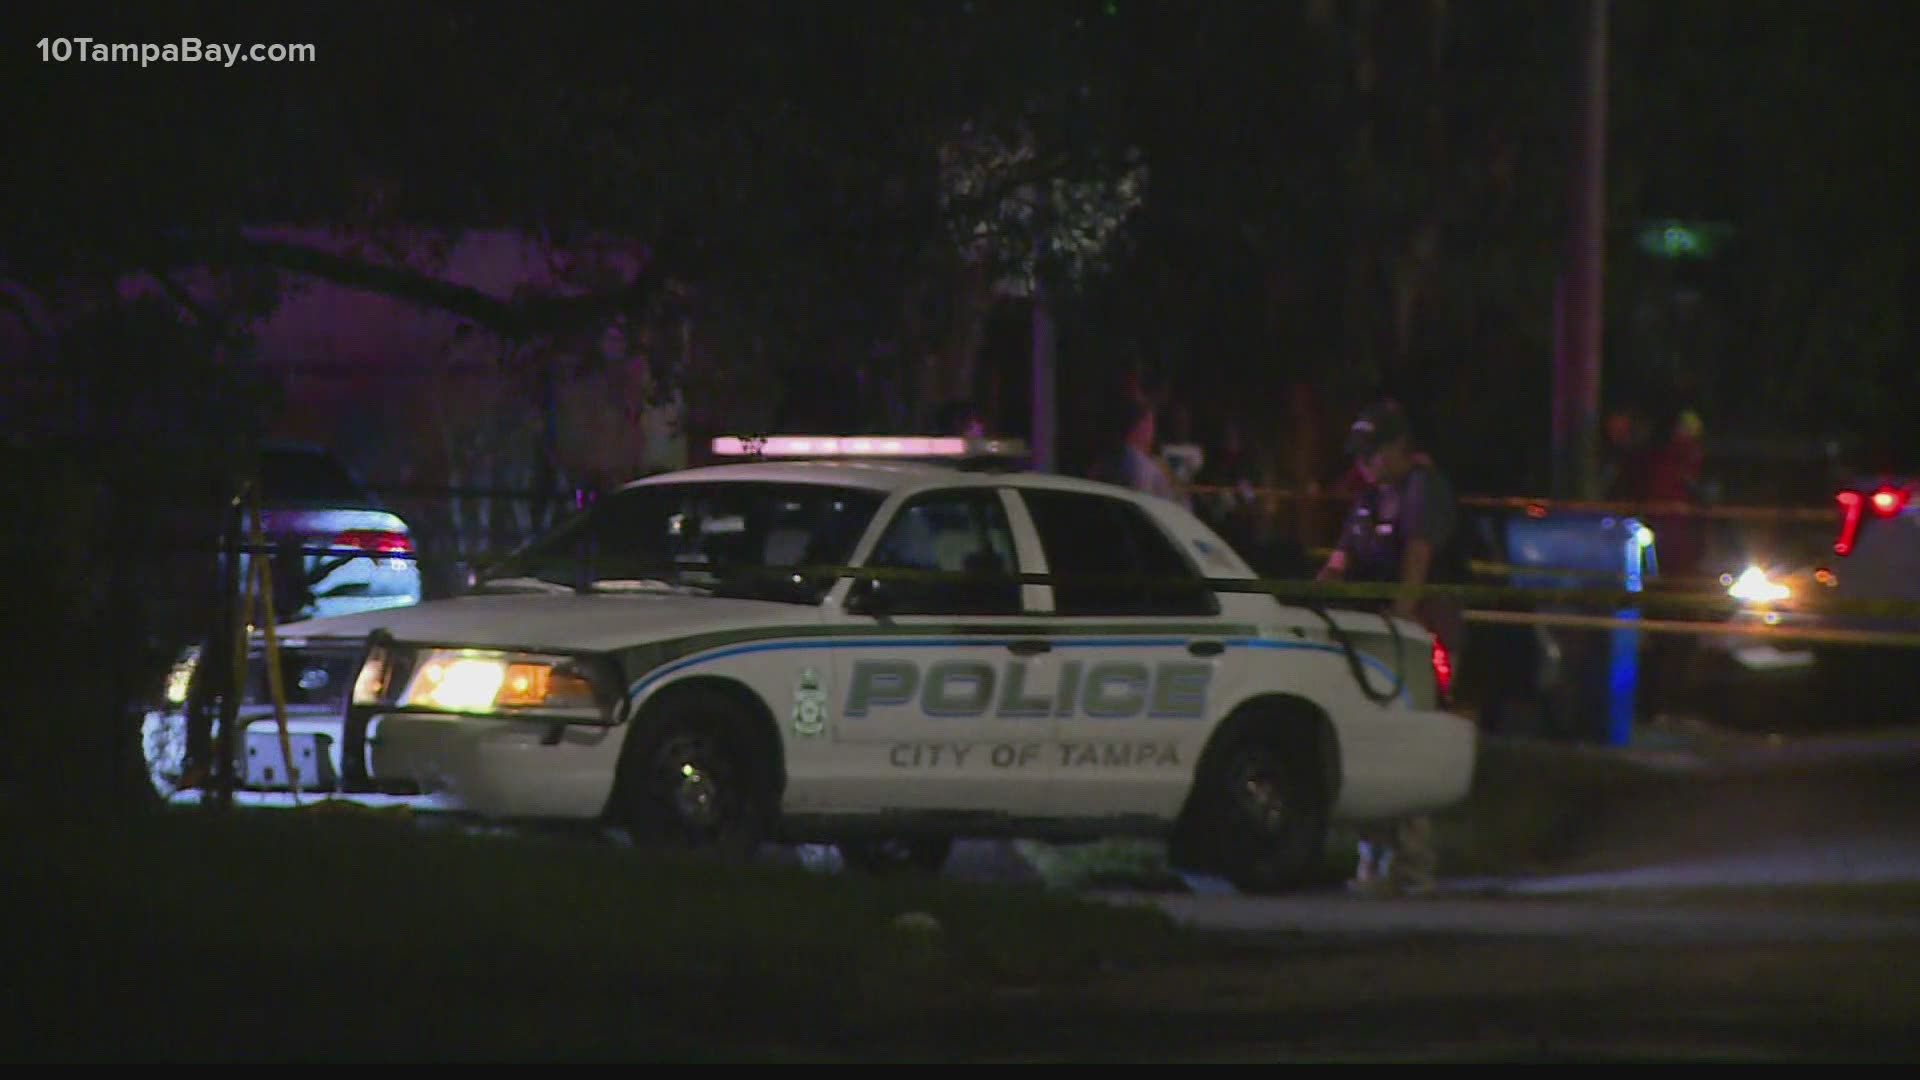 As gun violence plagues East Tampa, the police department is calling for people to come forward to put a stop to it.